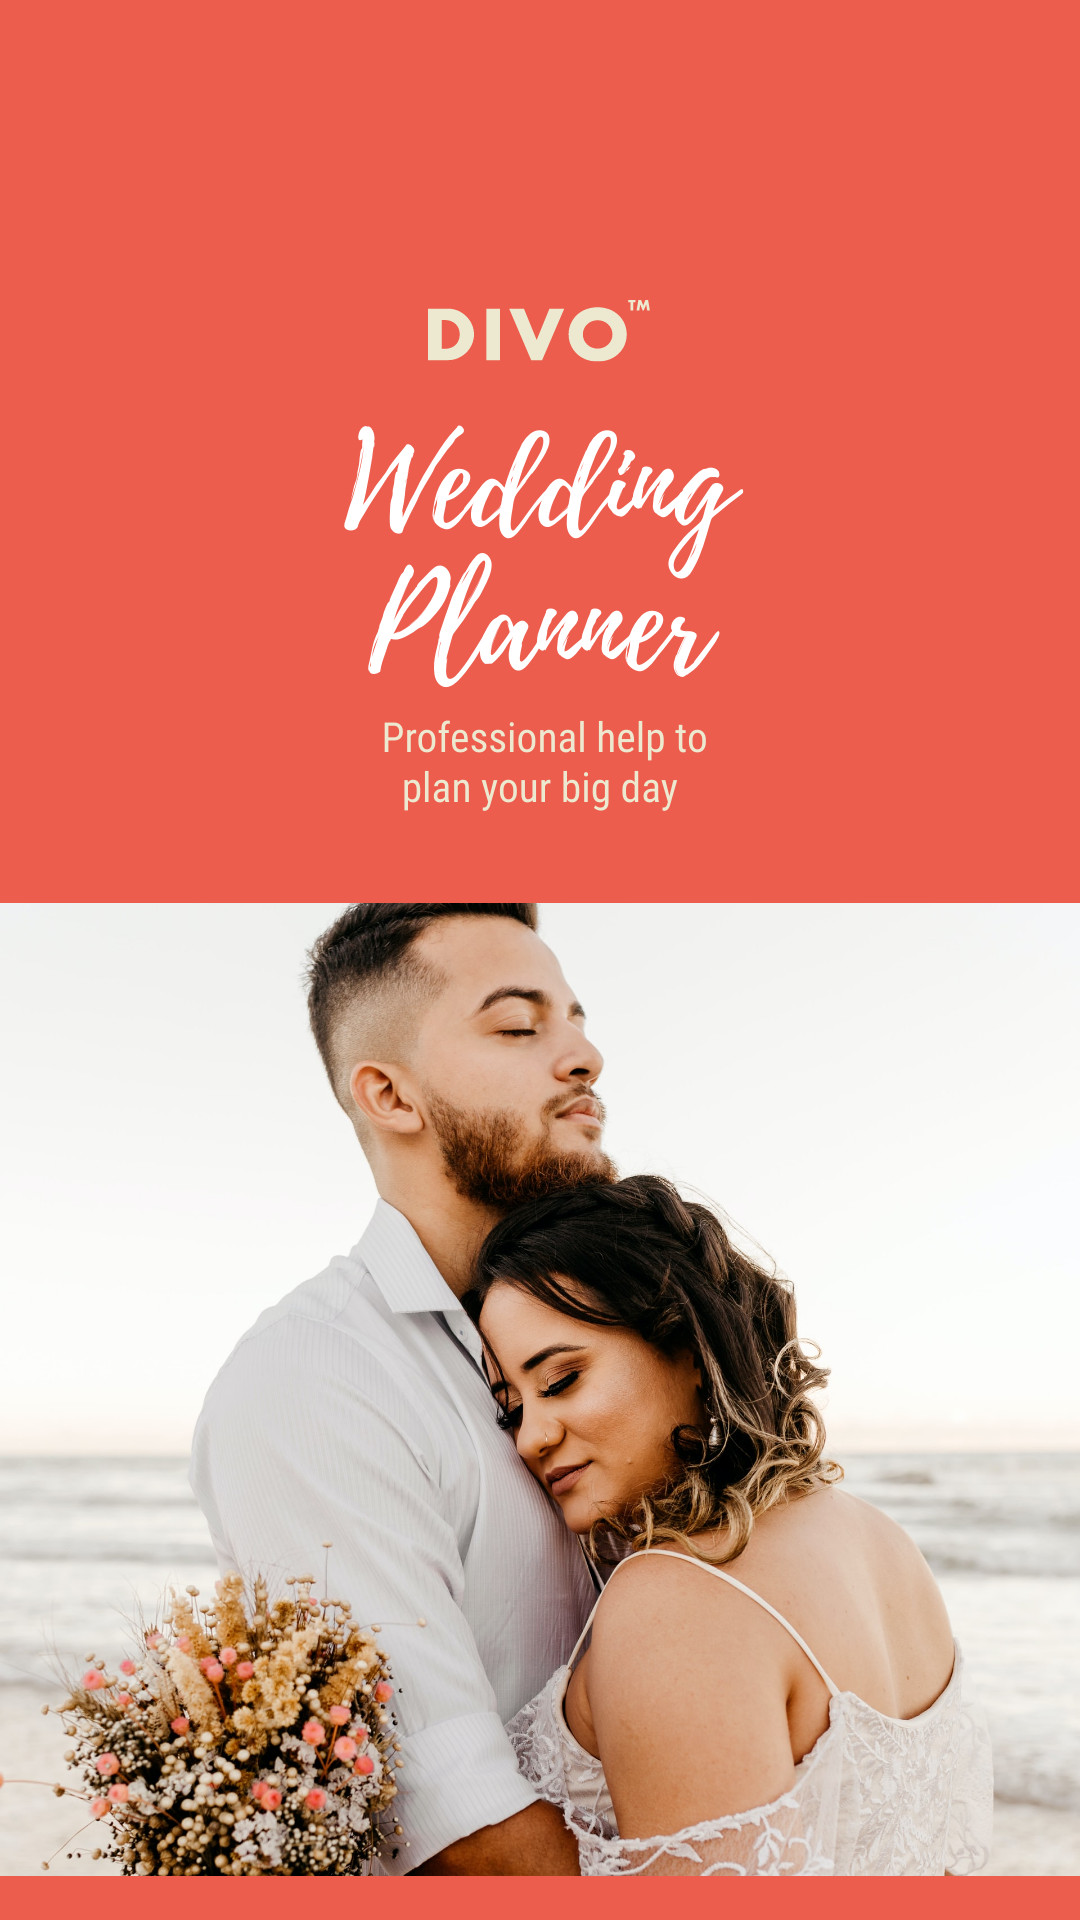 Professional Wedding Planner for Your Big Day 